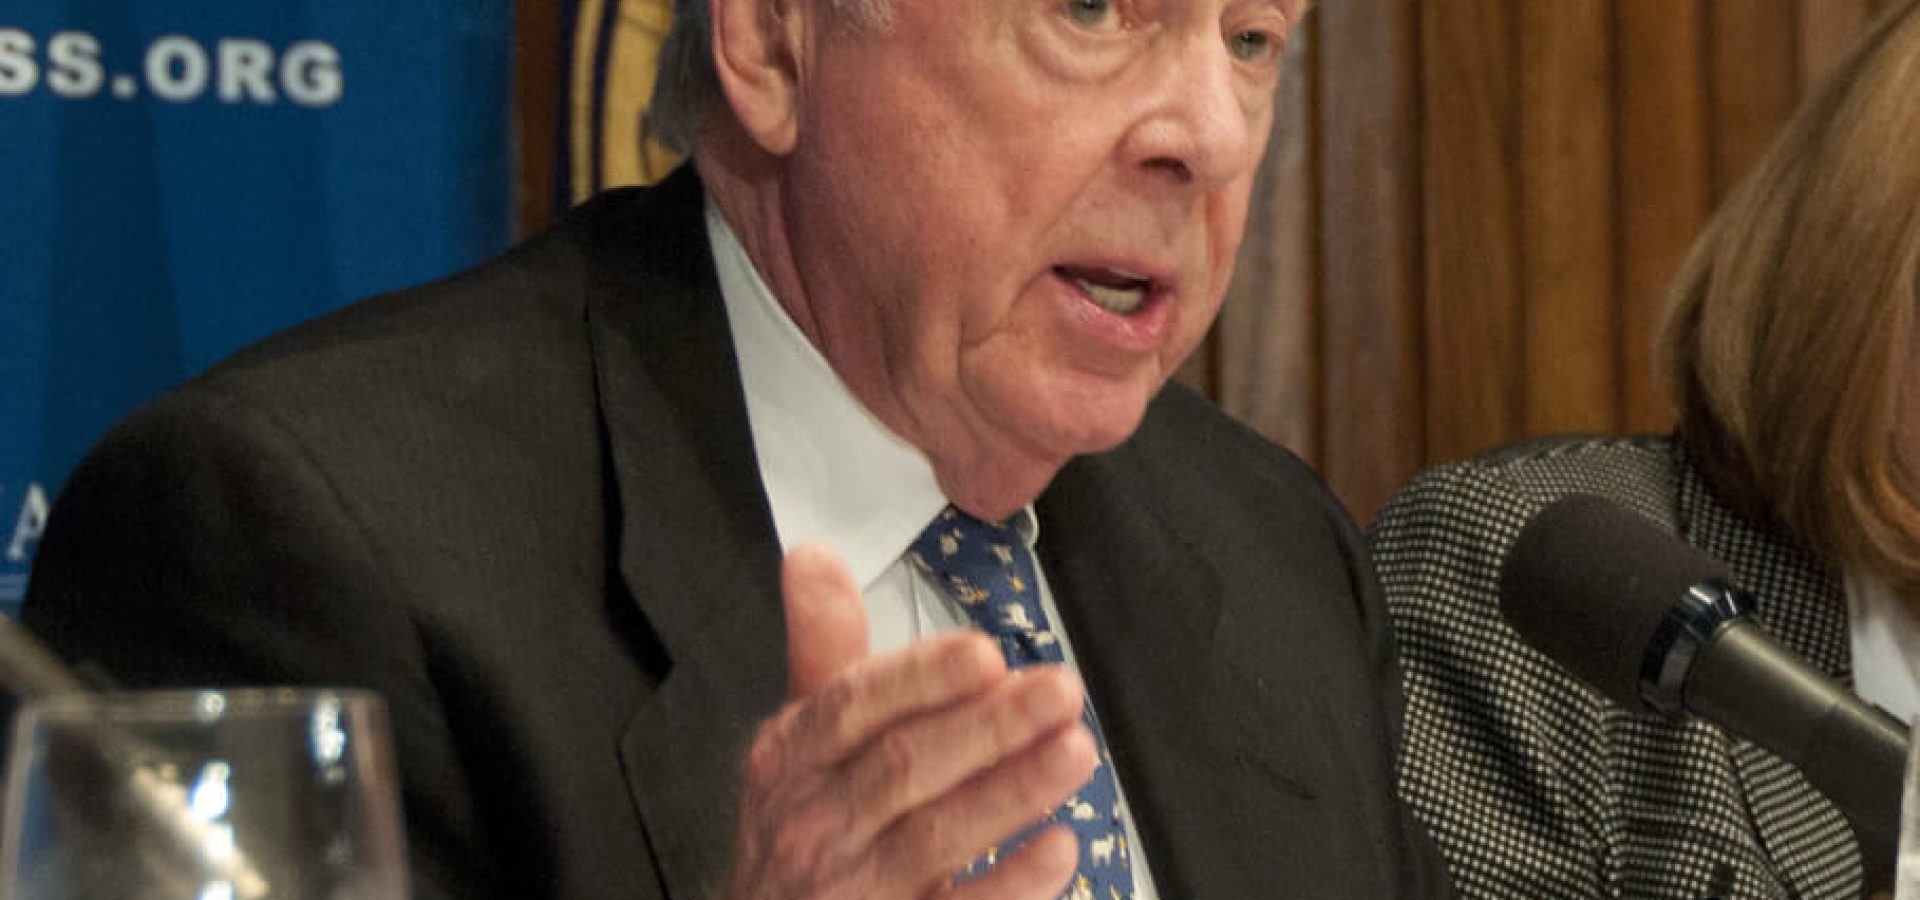 T. Boone: T. Boone Pickens speaks on meeting.